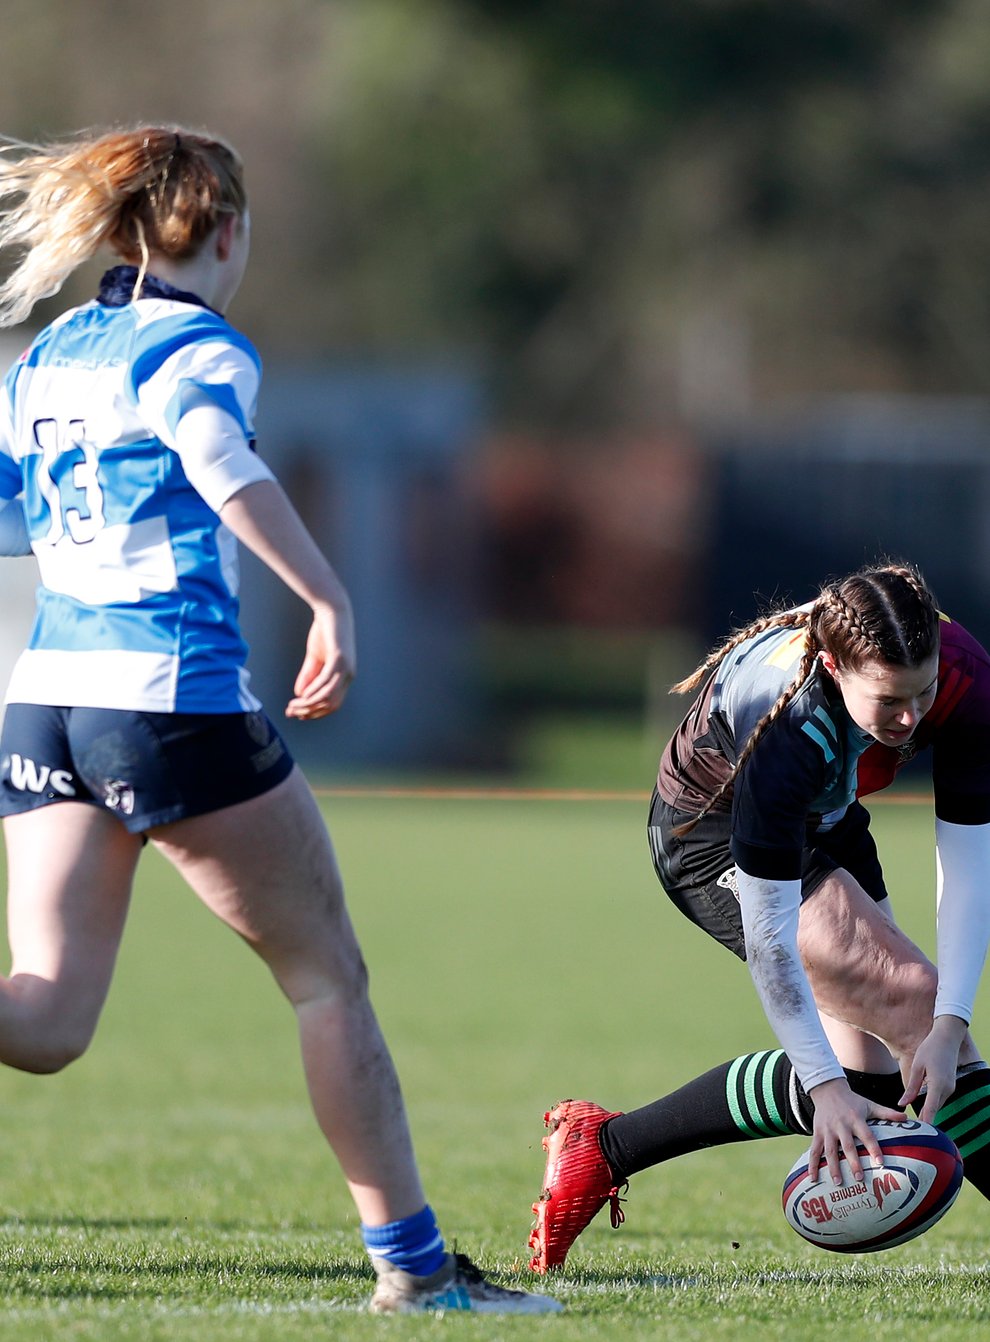 Jess Breach crossed the line five times as Quins stormed to victory Twitter: @HarlequinsWomen))